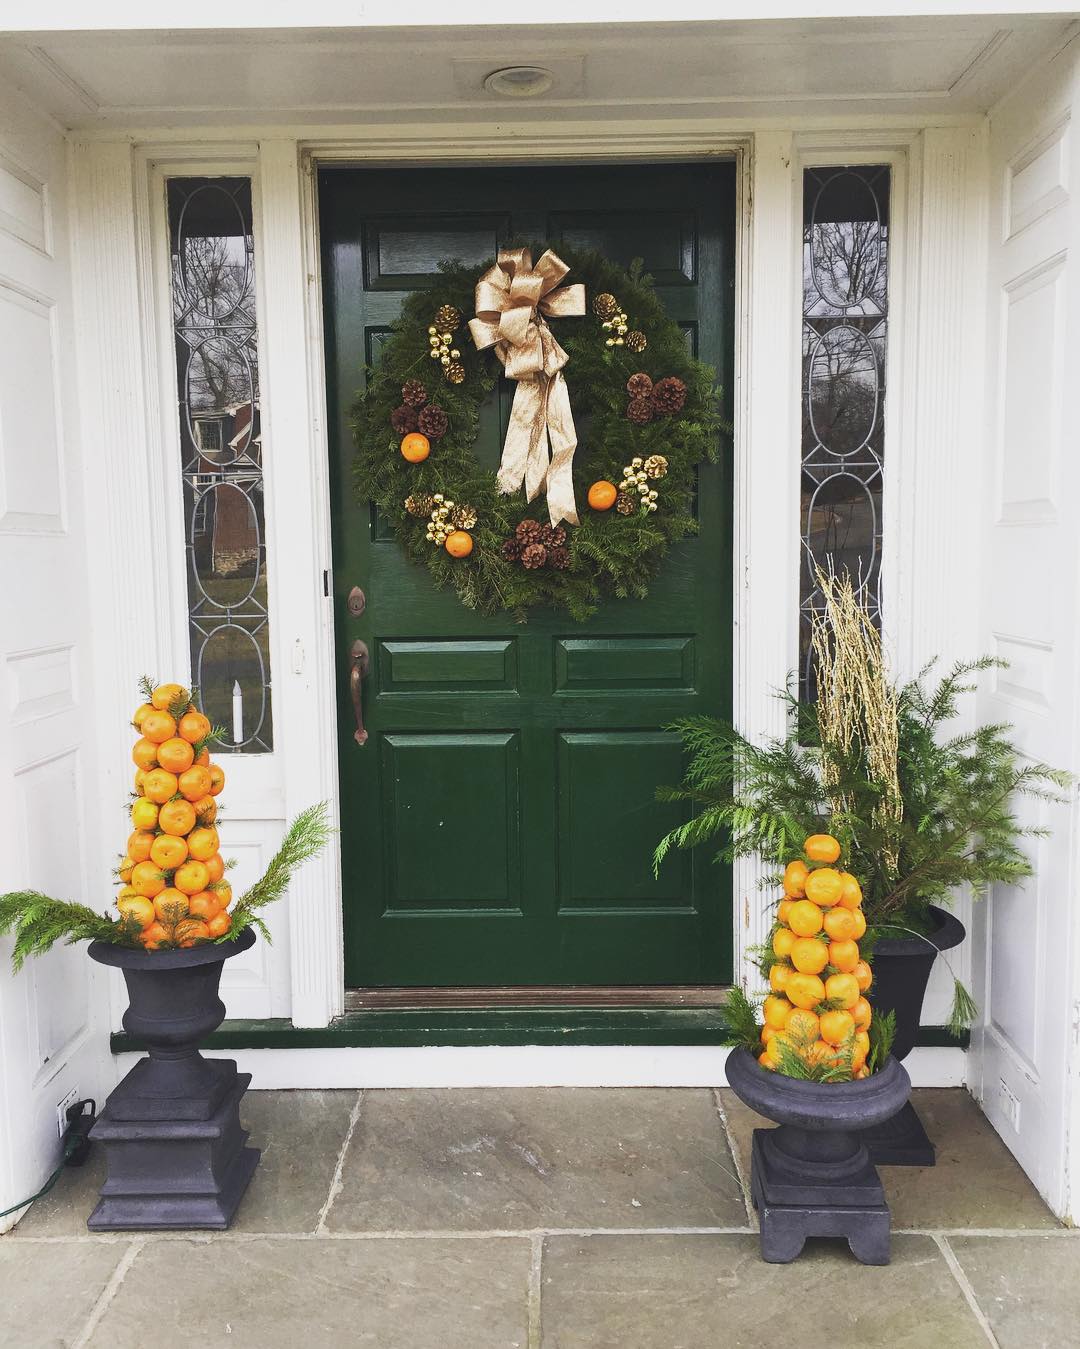 10 Inviting and Festive Front Doors for the Holiday Season